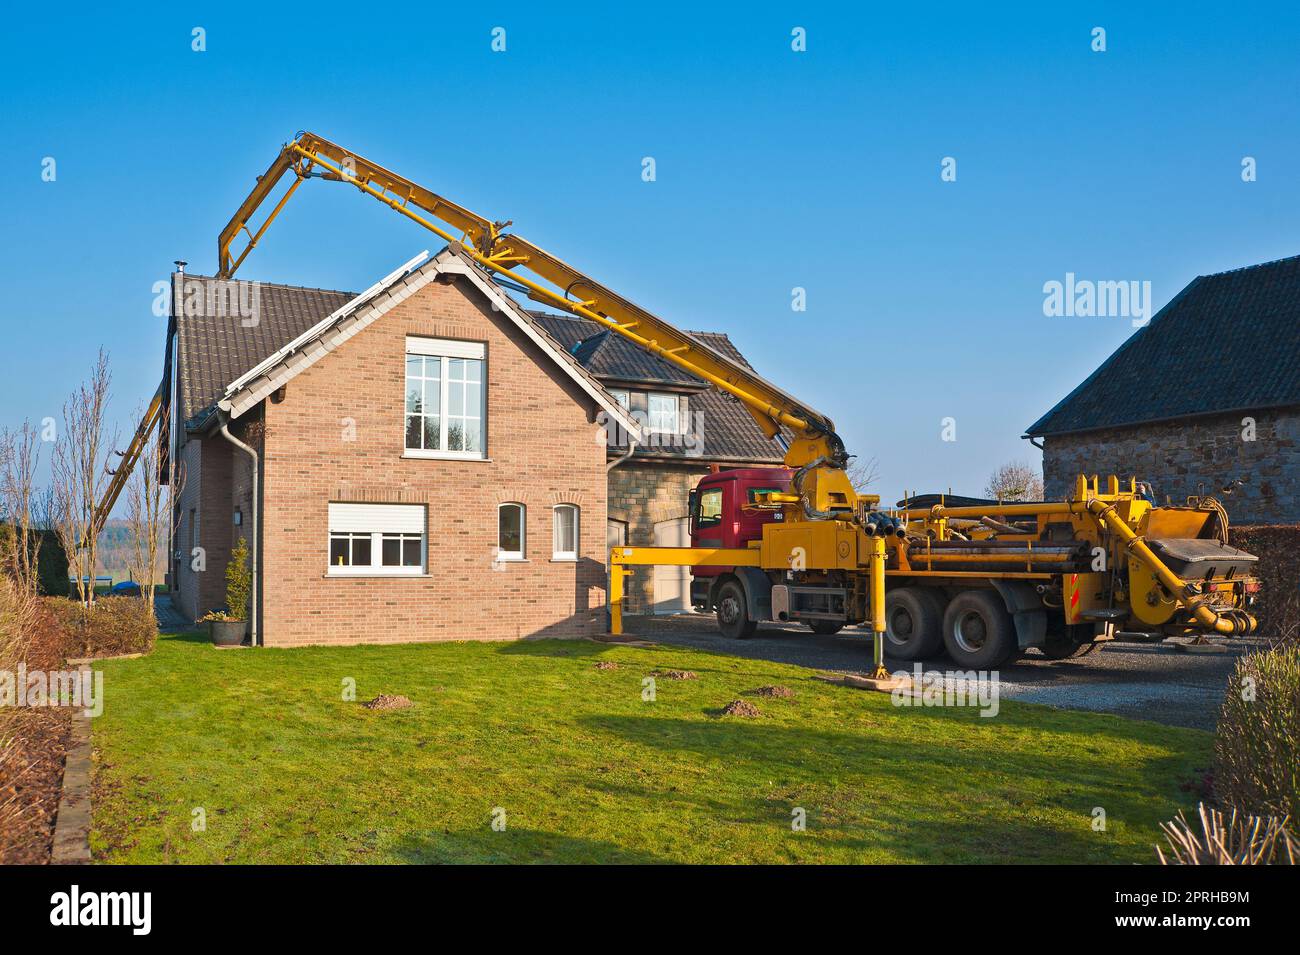 Truck-mounted concrete pump pumping concrete behind a single-family house Stock Photo